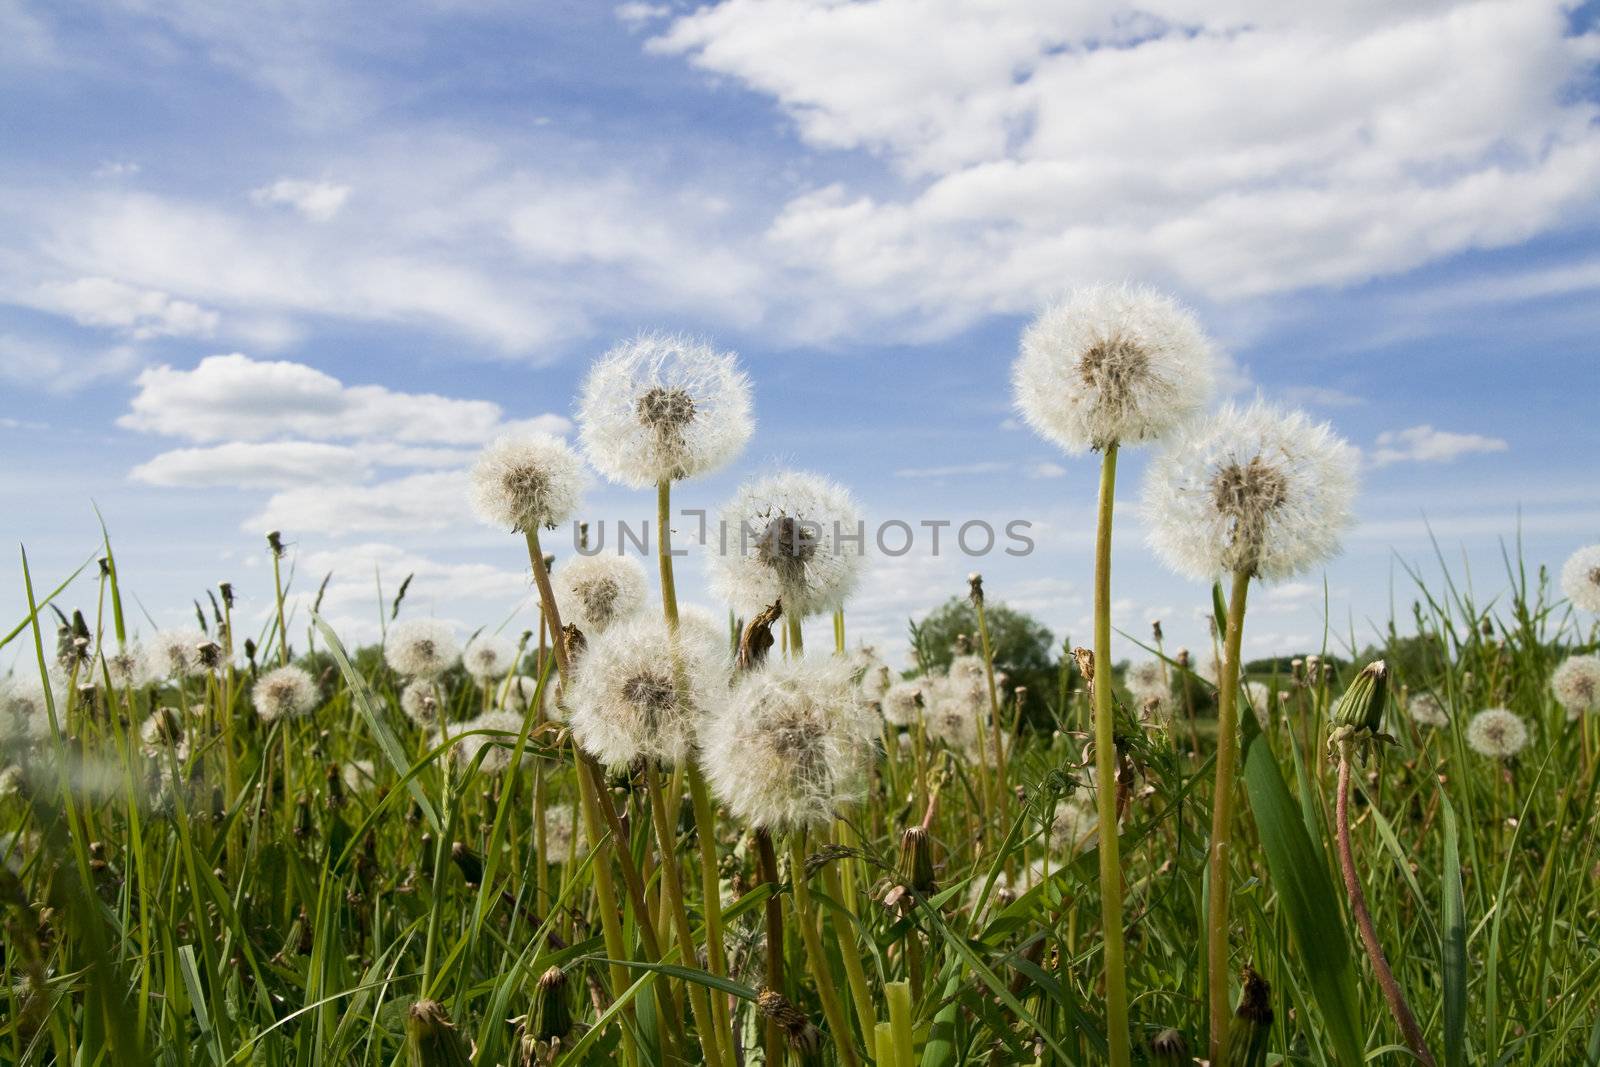 Extra close up of the dandelion on the cloudy sky background